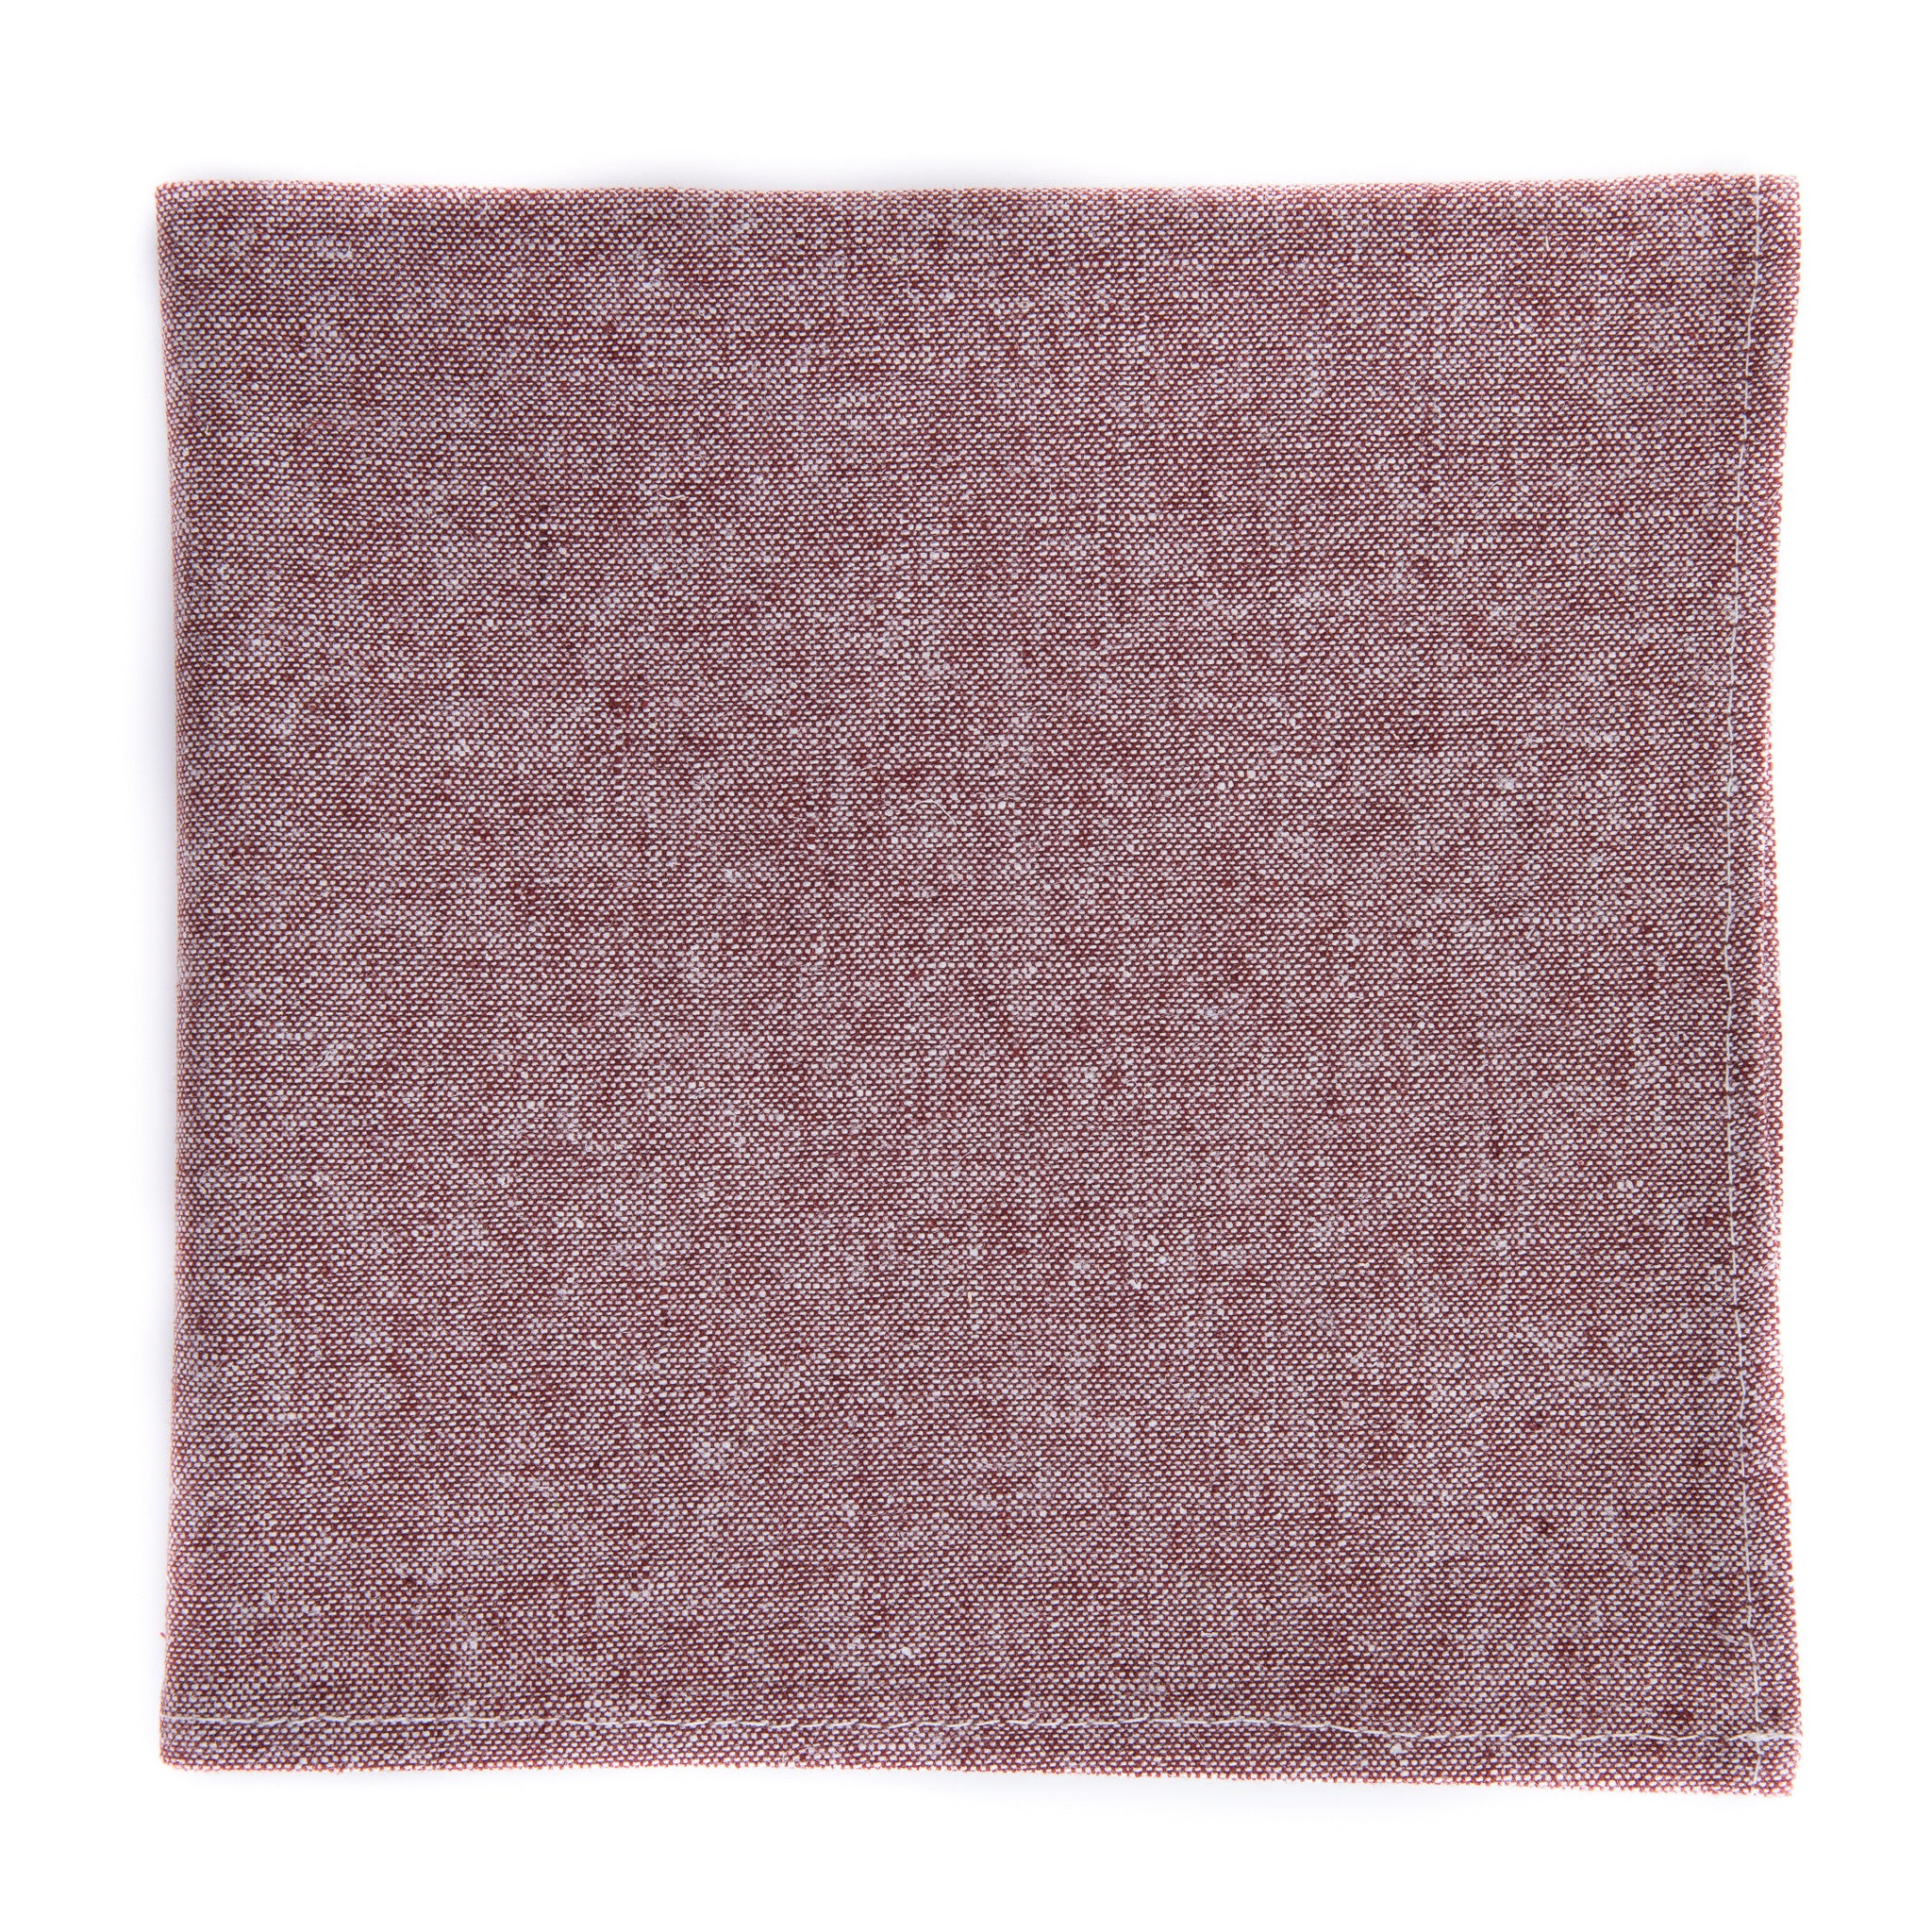 Rusty Red Chambray Pocket Square